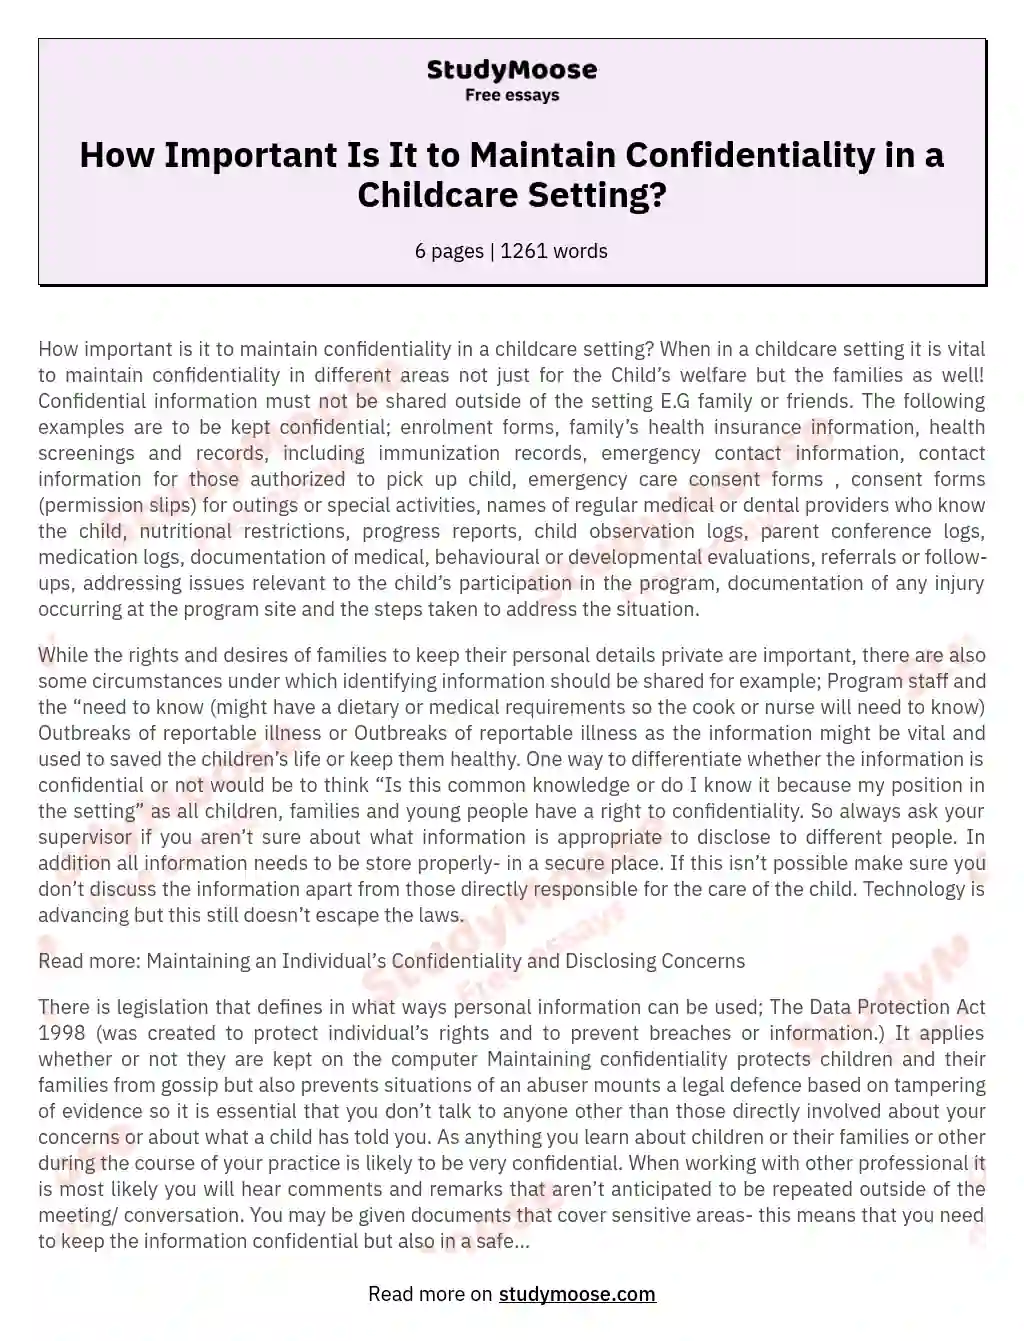 How Important Is It to Maintain Confidentiality in a Childcare Setting? essay